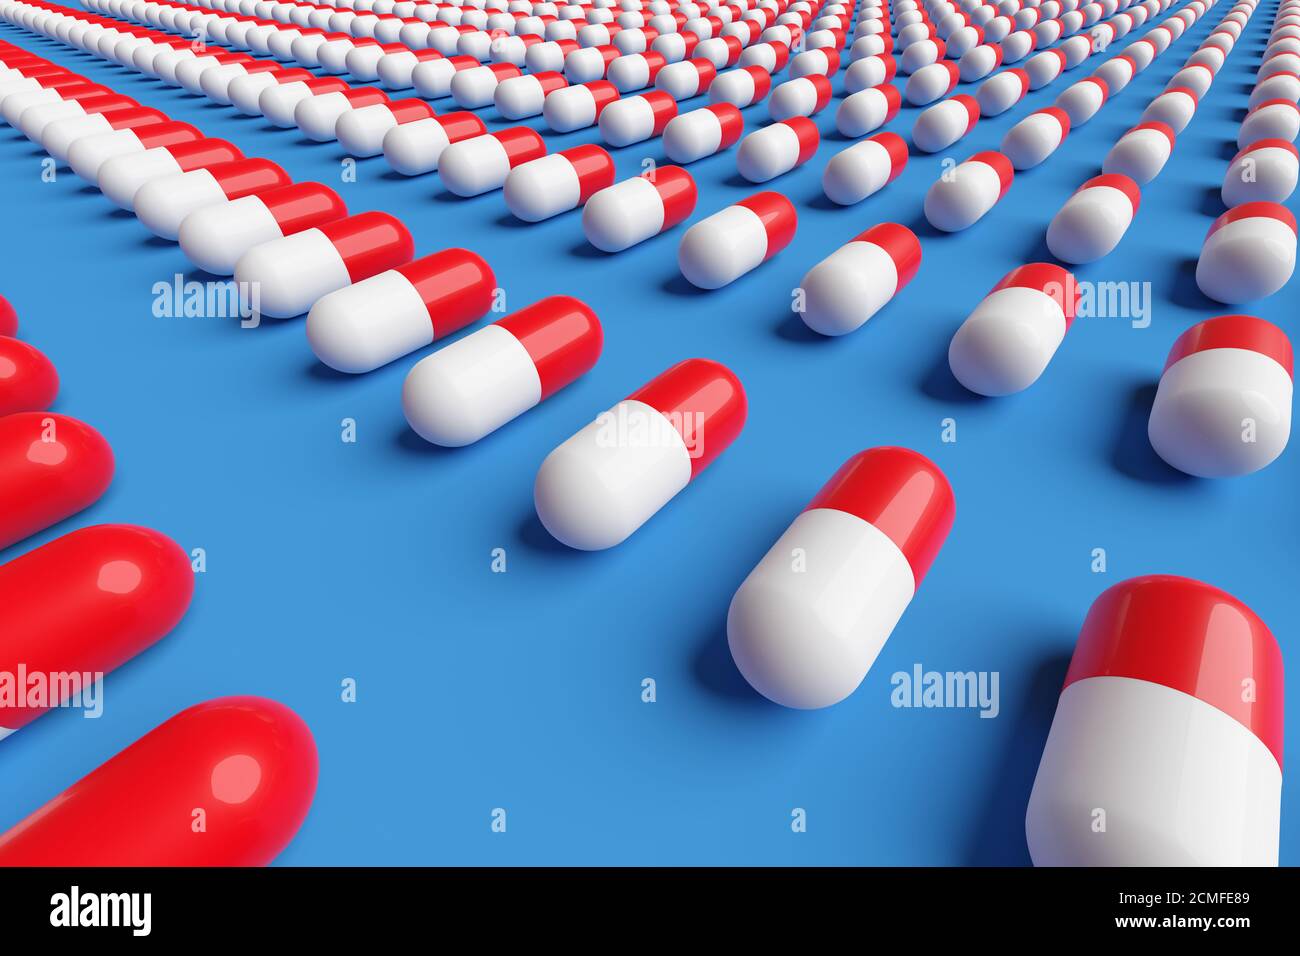 Red and white pills on a blue background. 3d illustration. Stock Photo